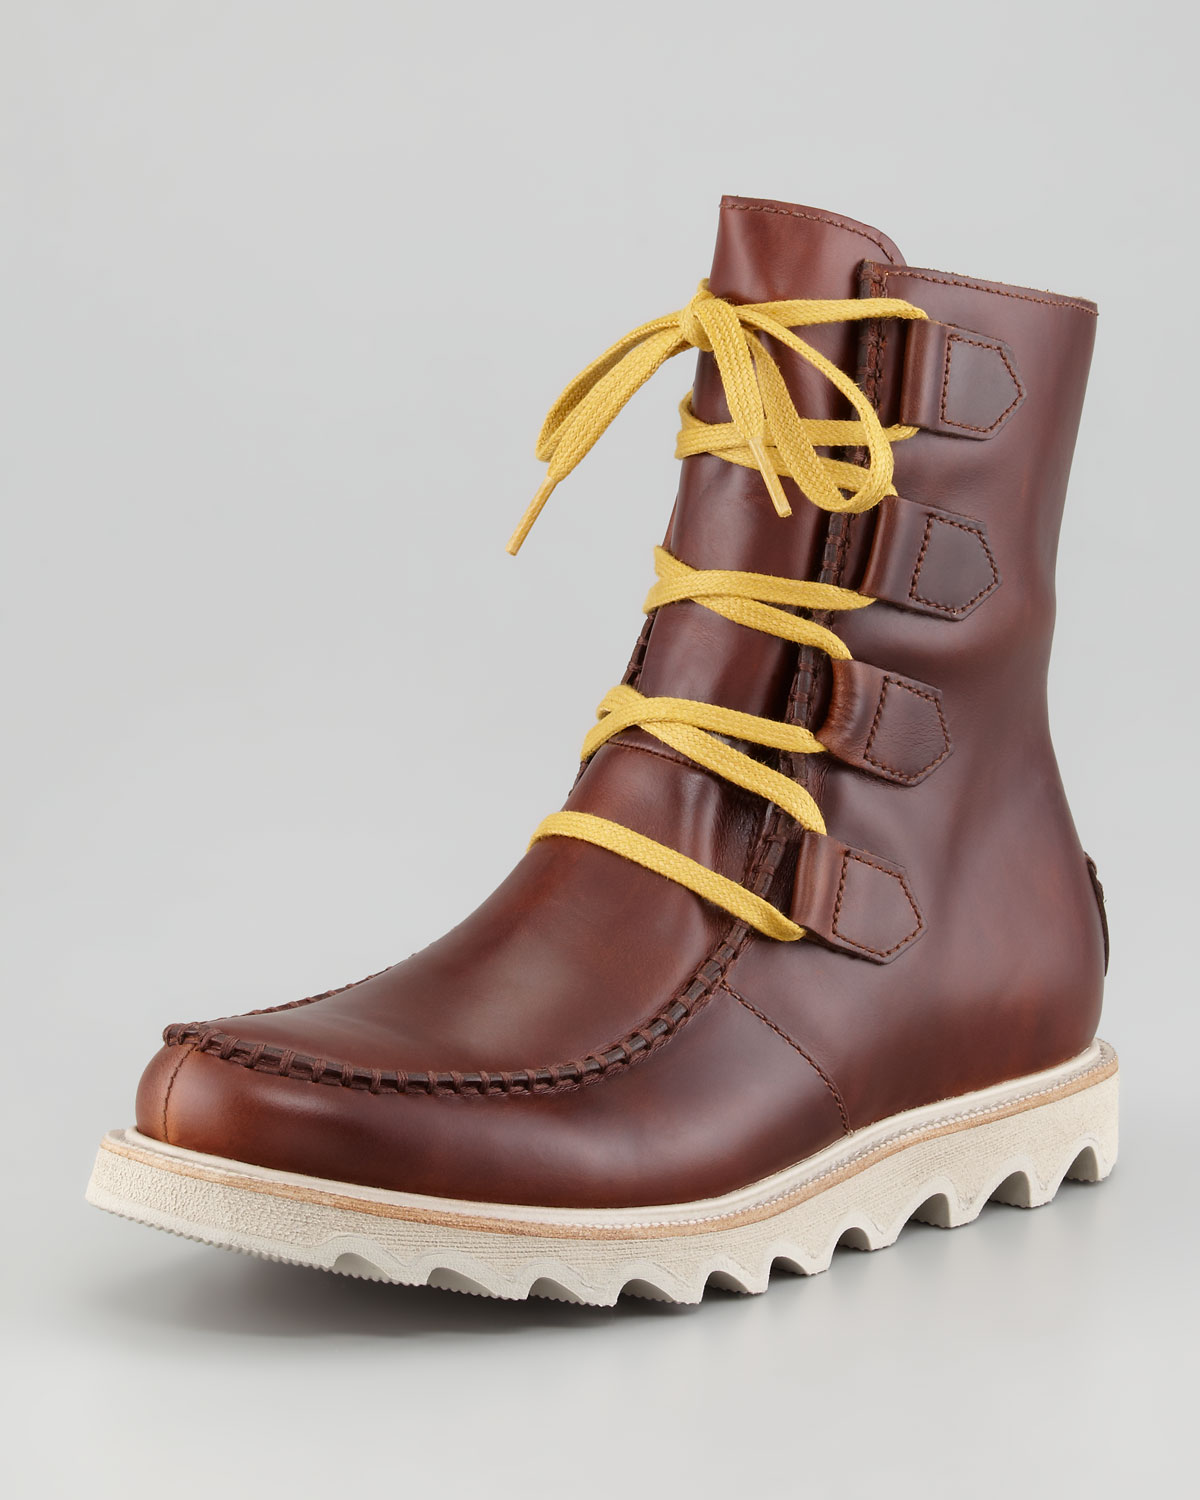 Laceup Mad Boot in 9 (Brown) for Men - Lyst